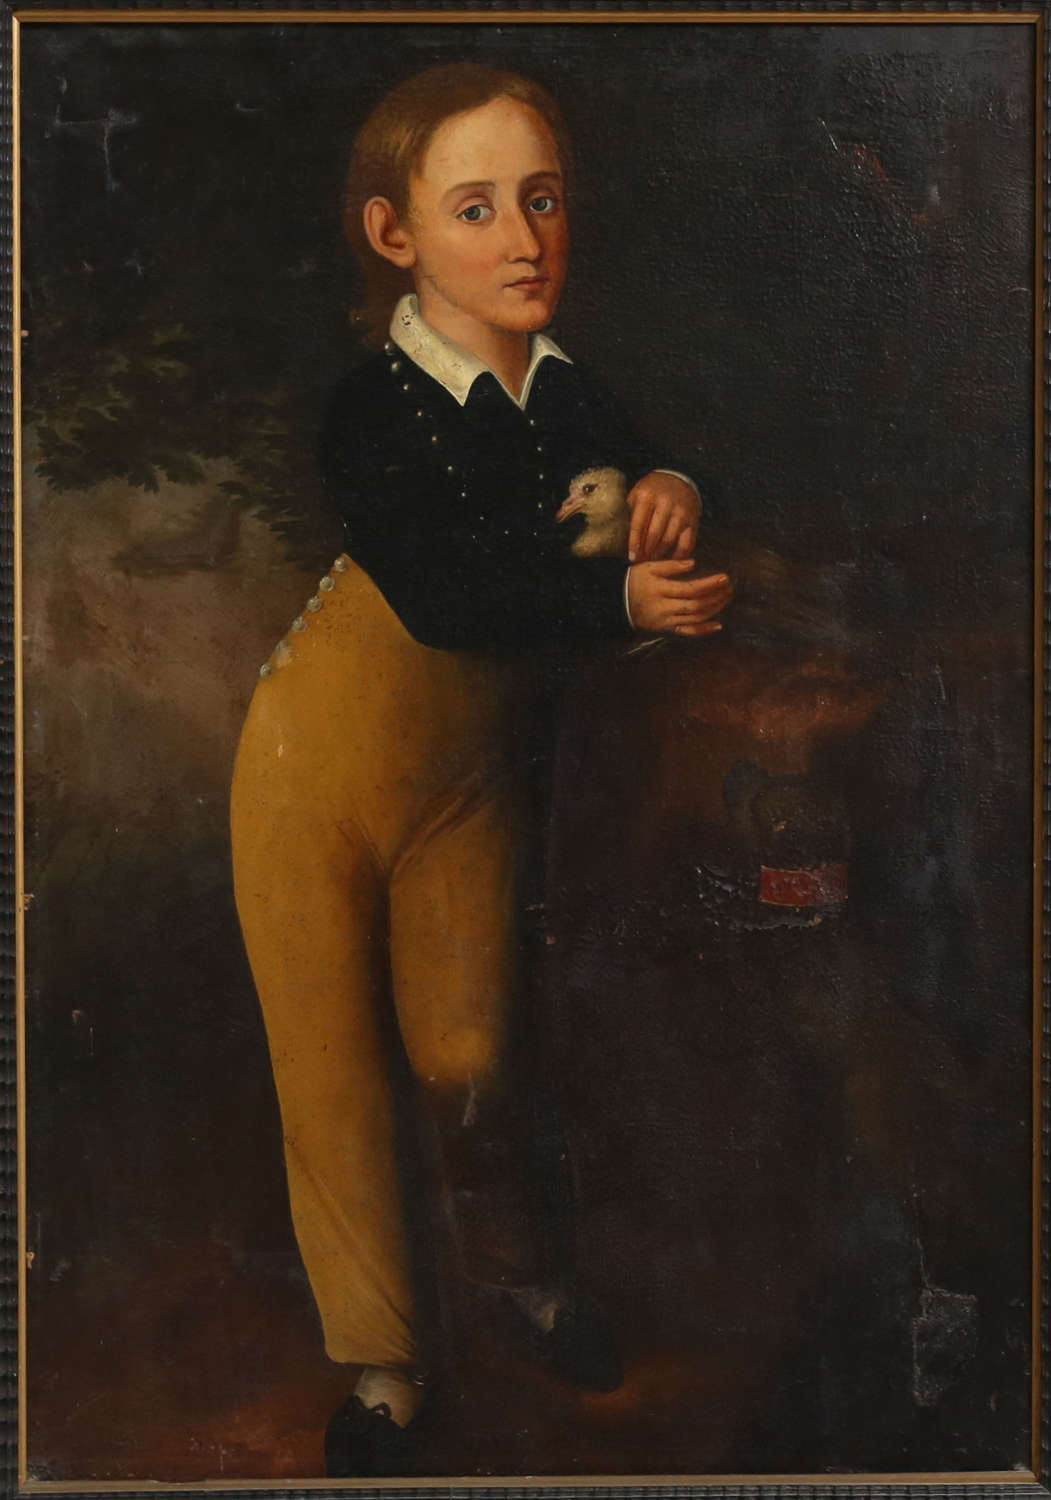 19th century portrait of a young boy